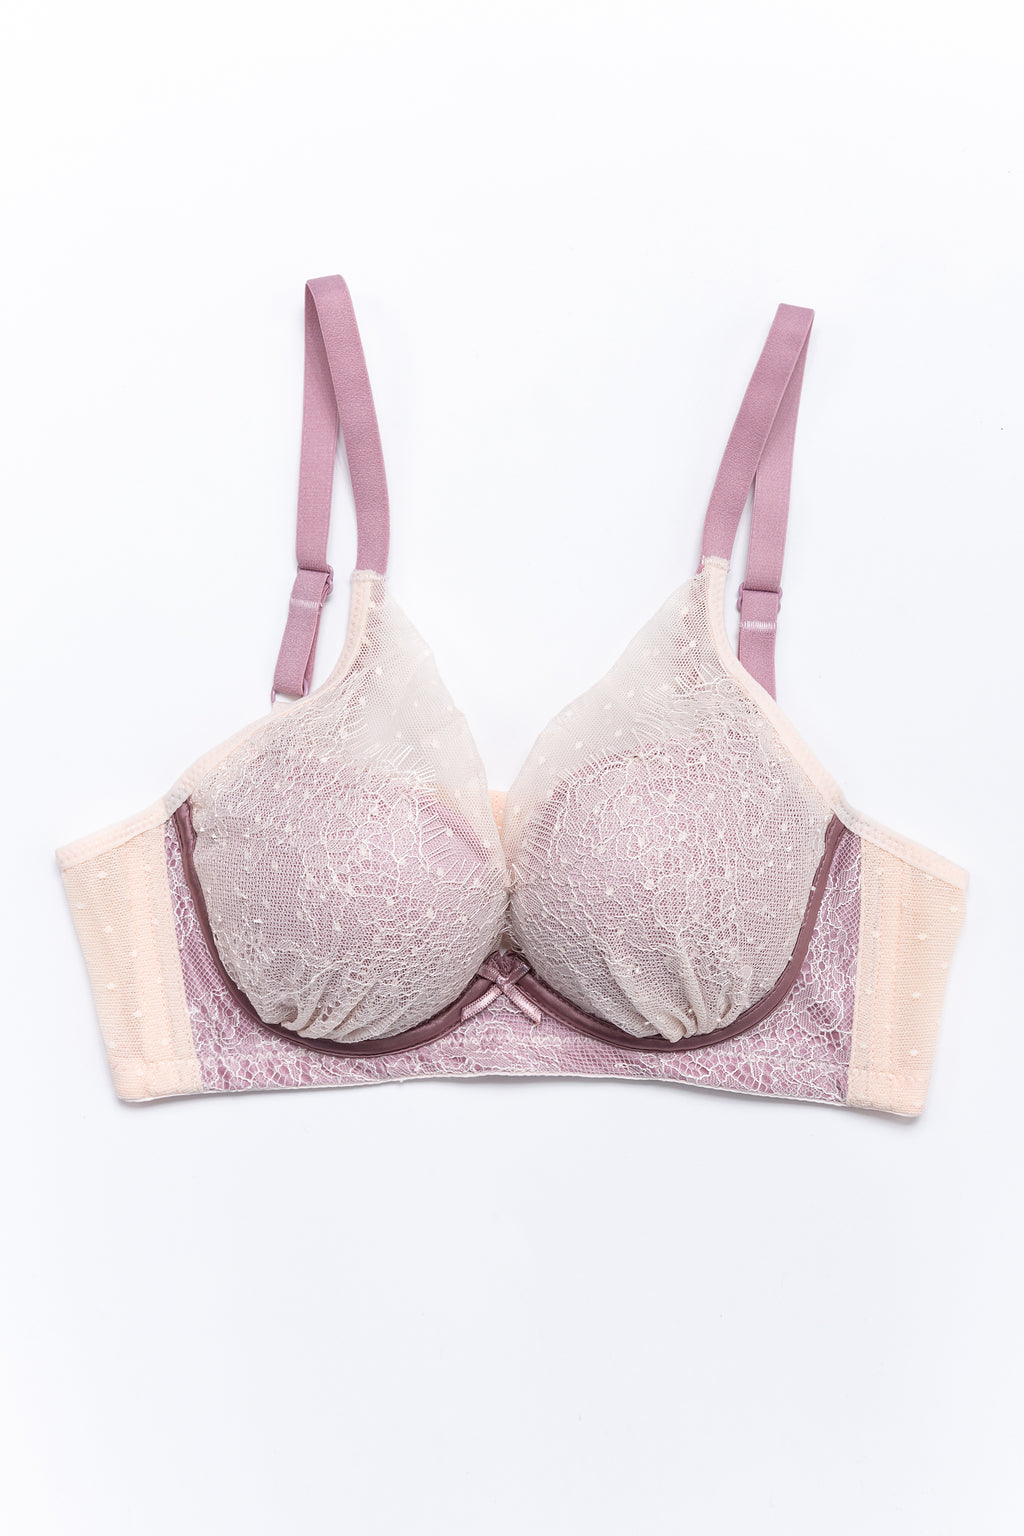 K.Lynn Lingerie - 40% off select Chantelle bras! This bra offers unrivaled  lift and support! ✨ Click below to shop now!   WhatsApp ➡️   Cash on Delivery 🇱🇧 🇦🇪🇸🇦 Worldwide